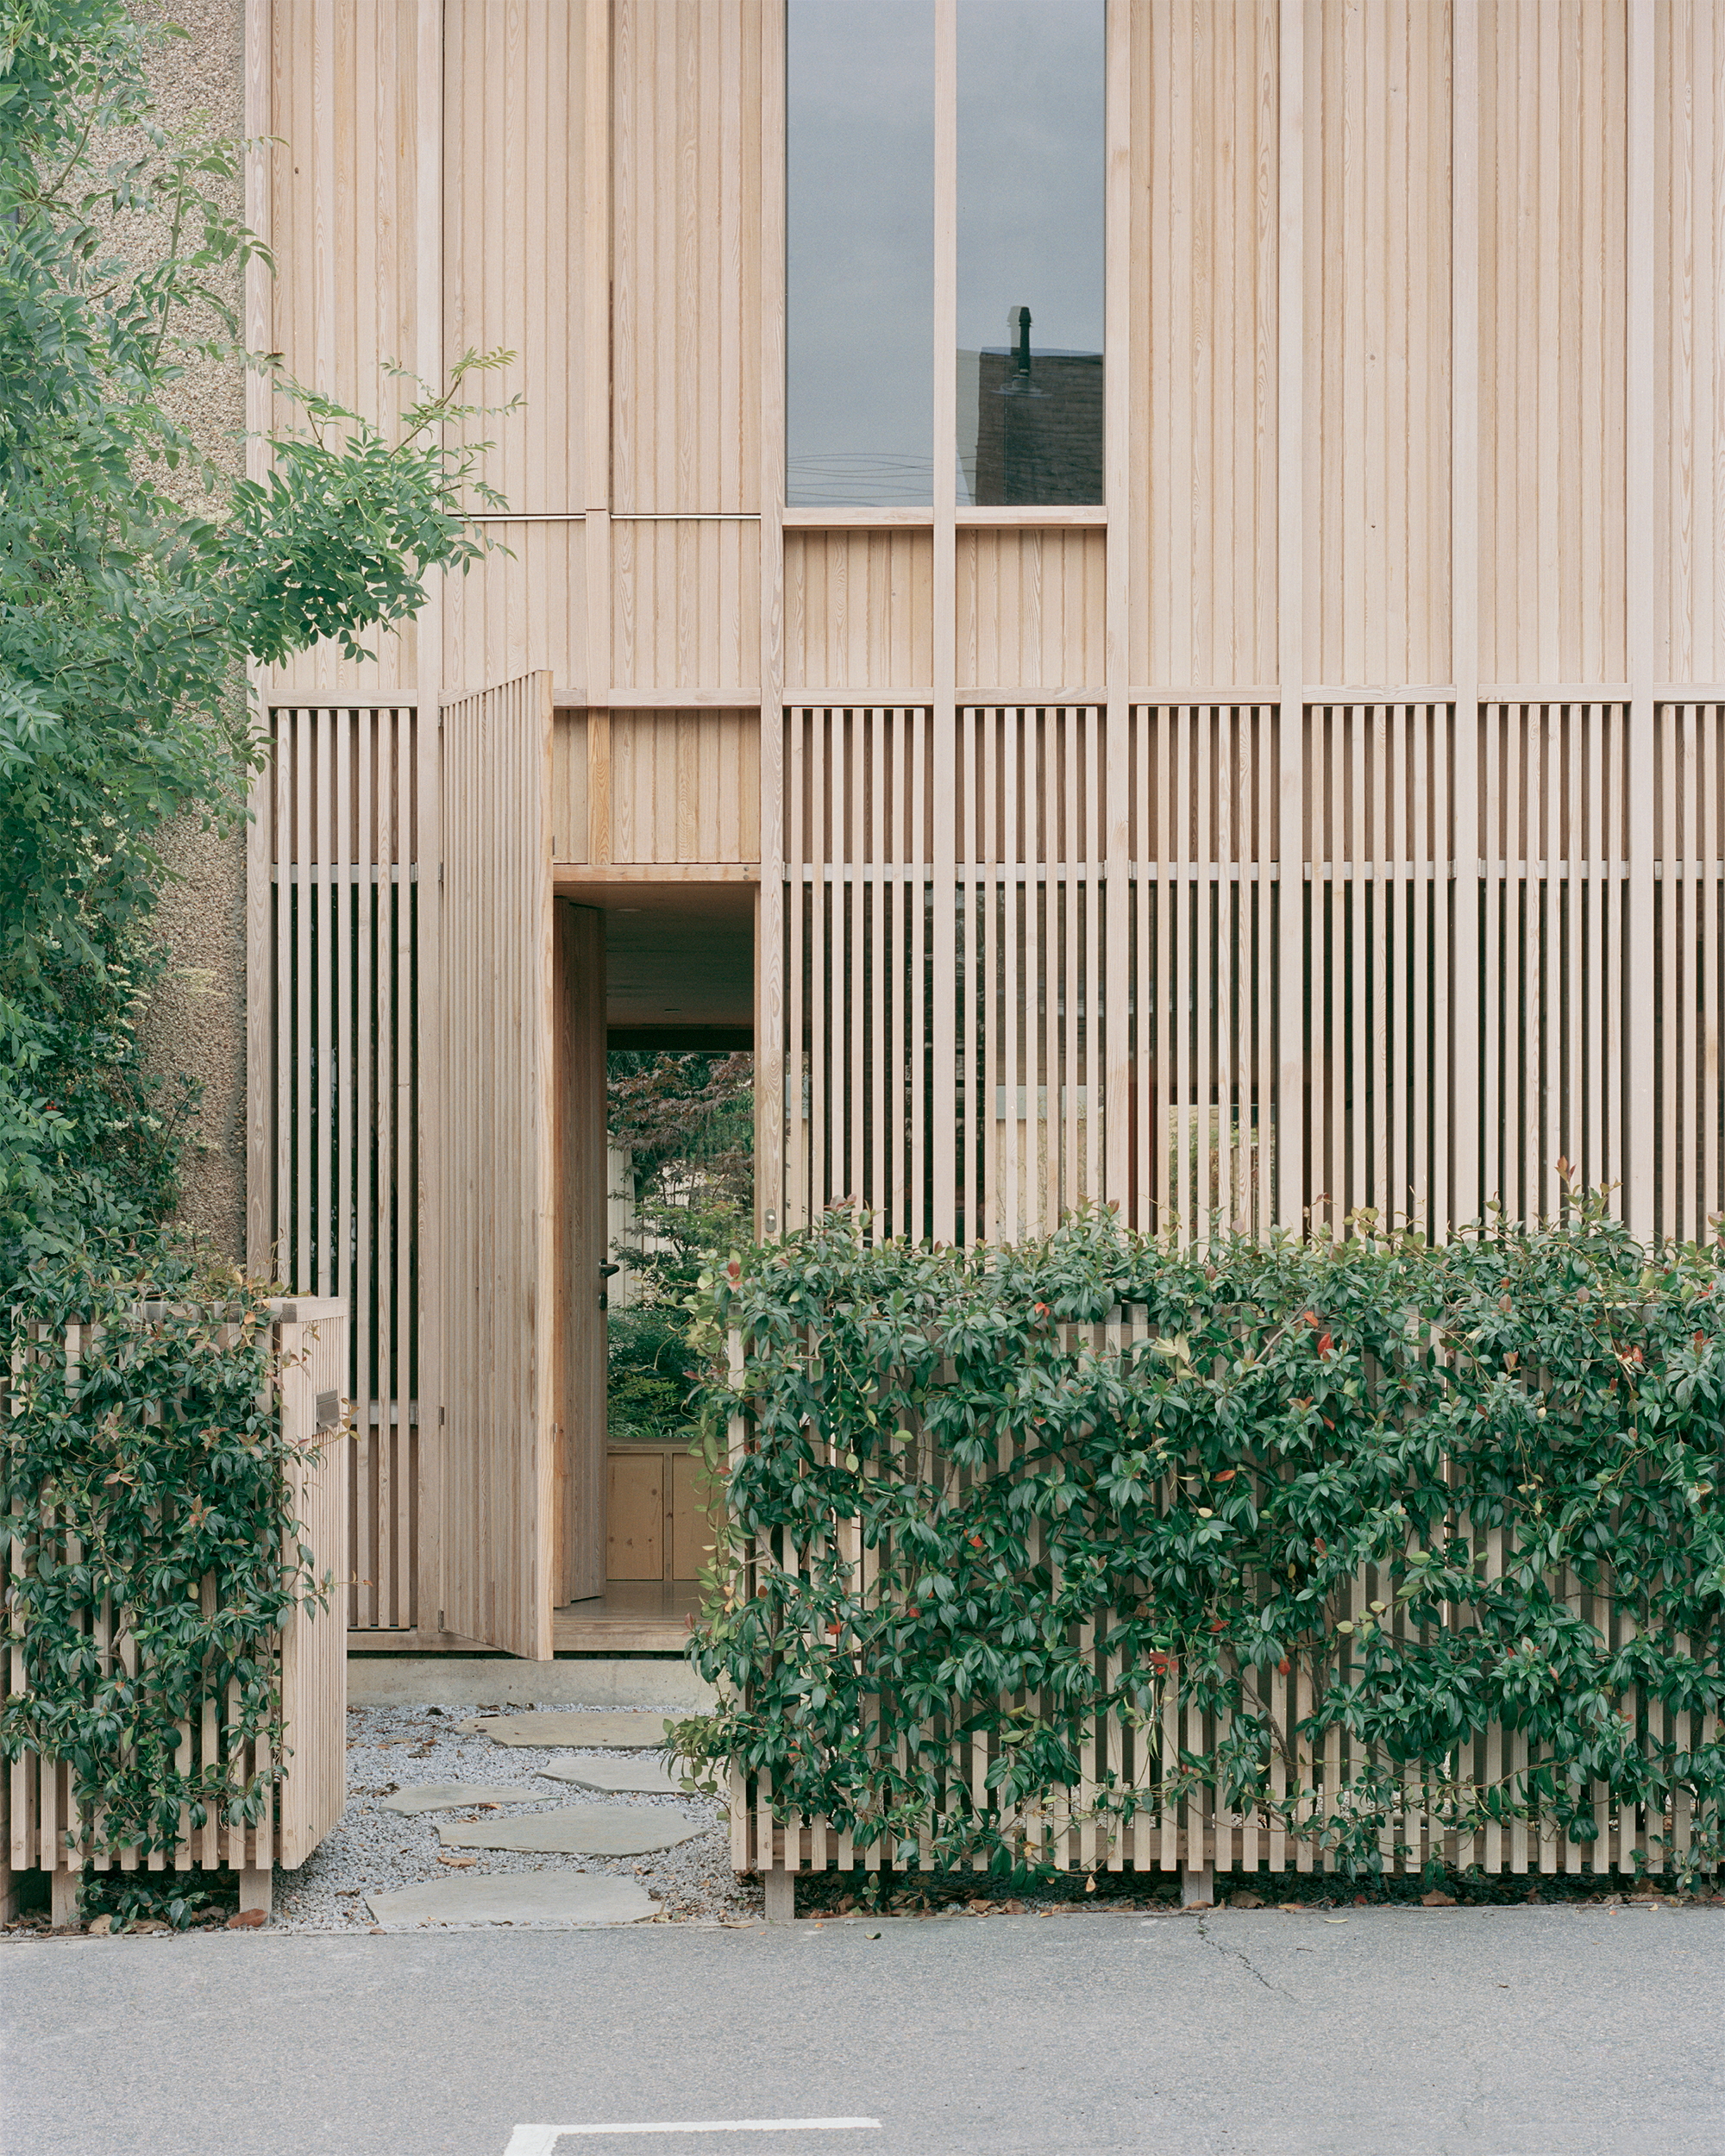 AO-FT Architects Completes Spruce House & Studio, their Debut Project in London - Gessato